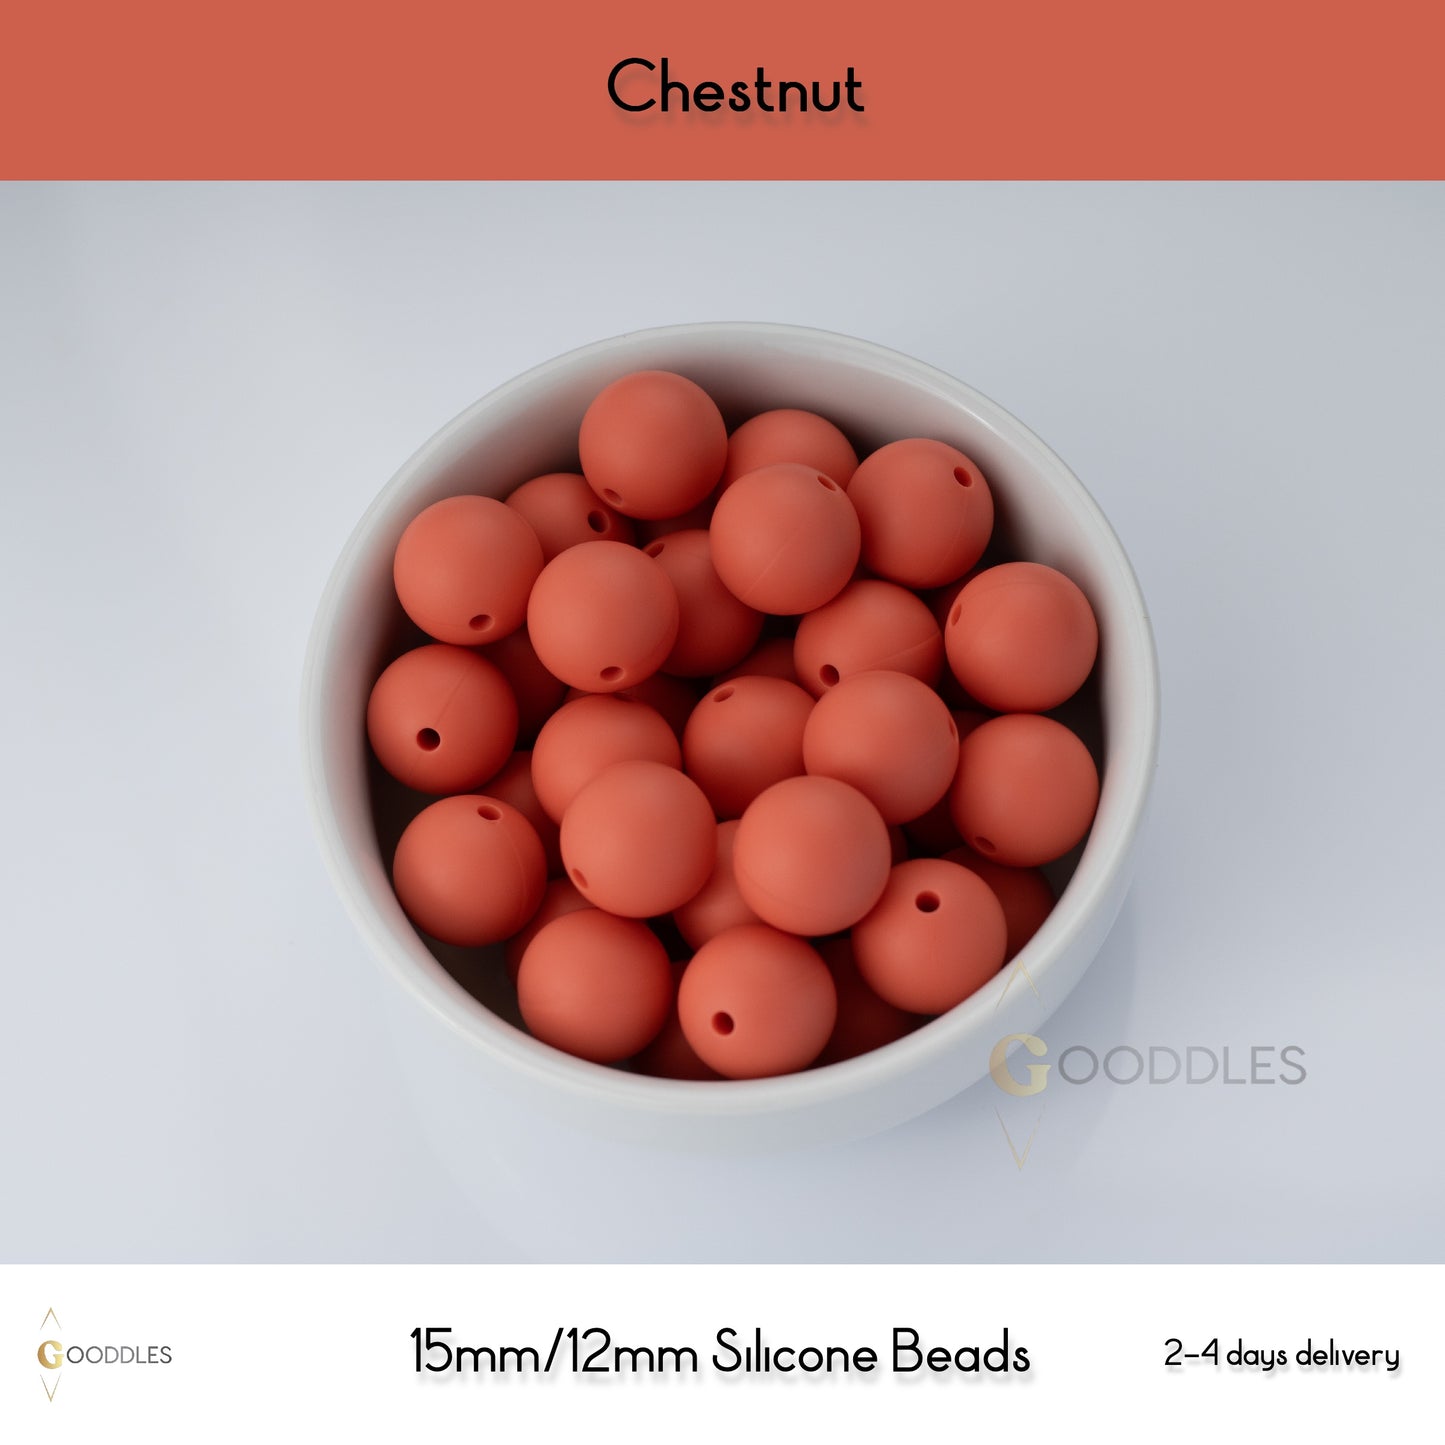 5pcs, Chestnut Silicone Beads Round Silicone Beads